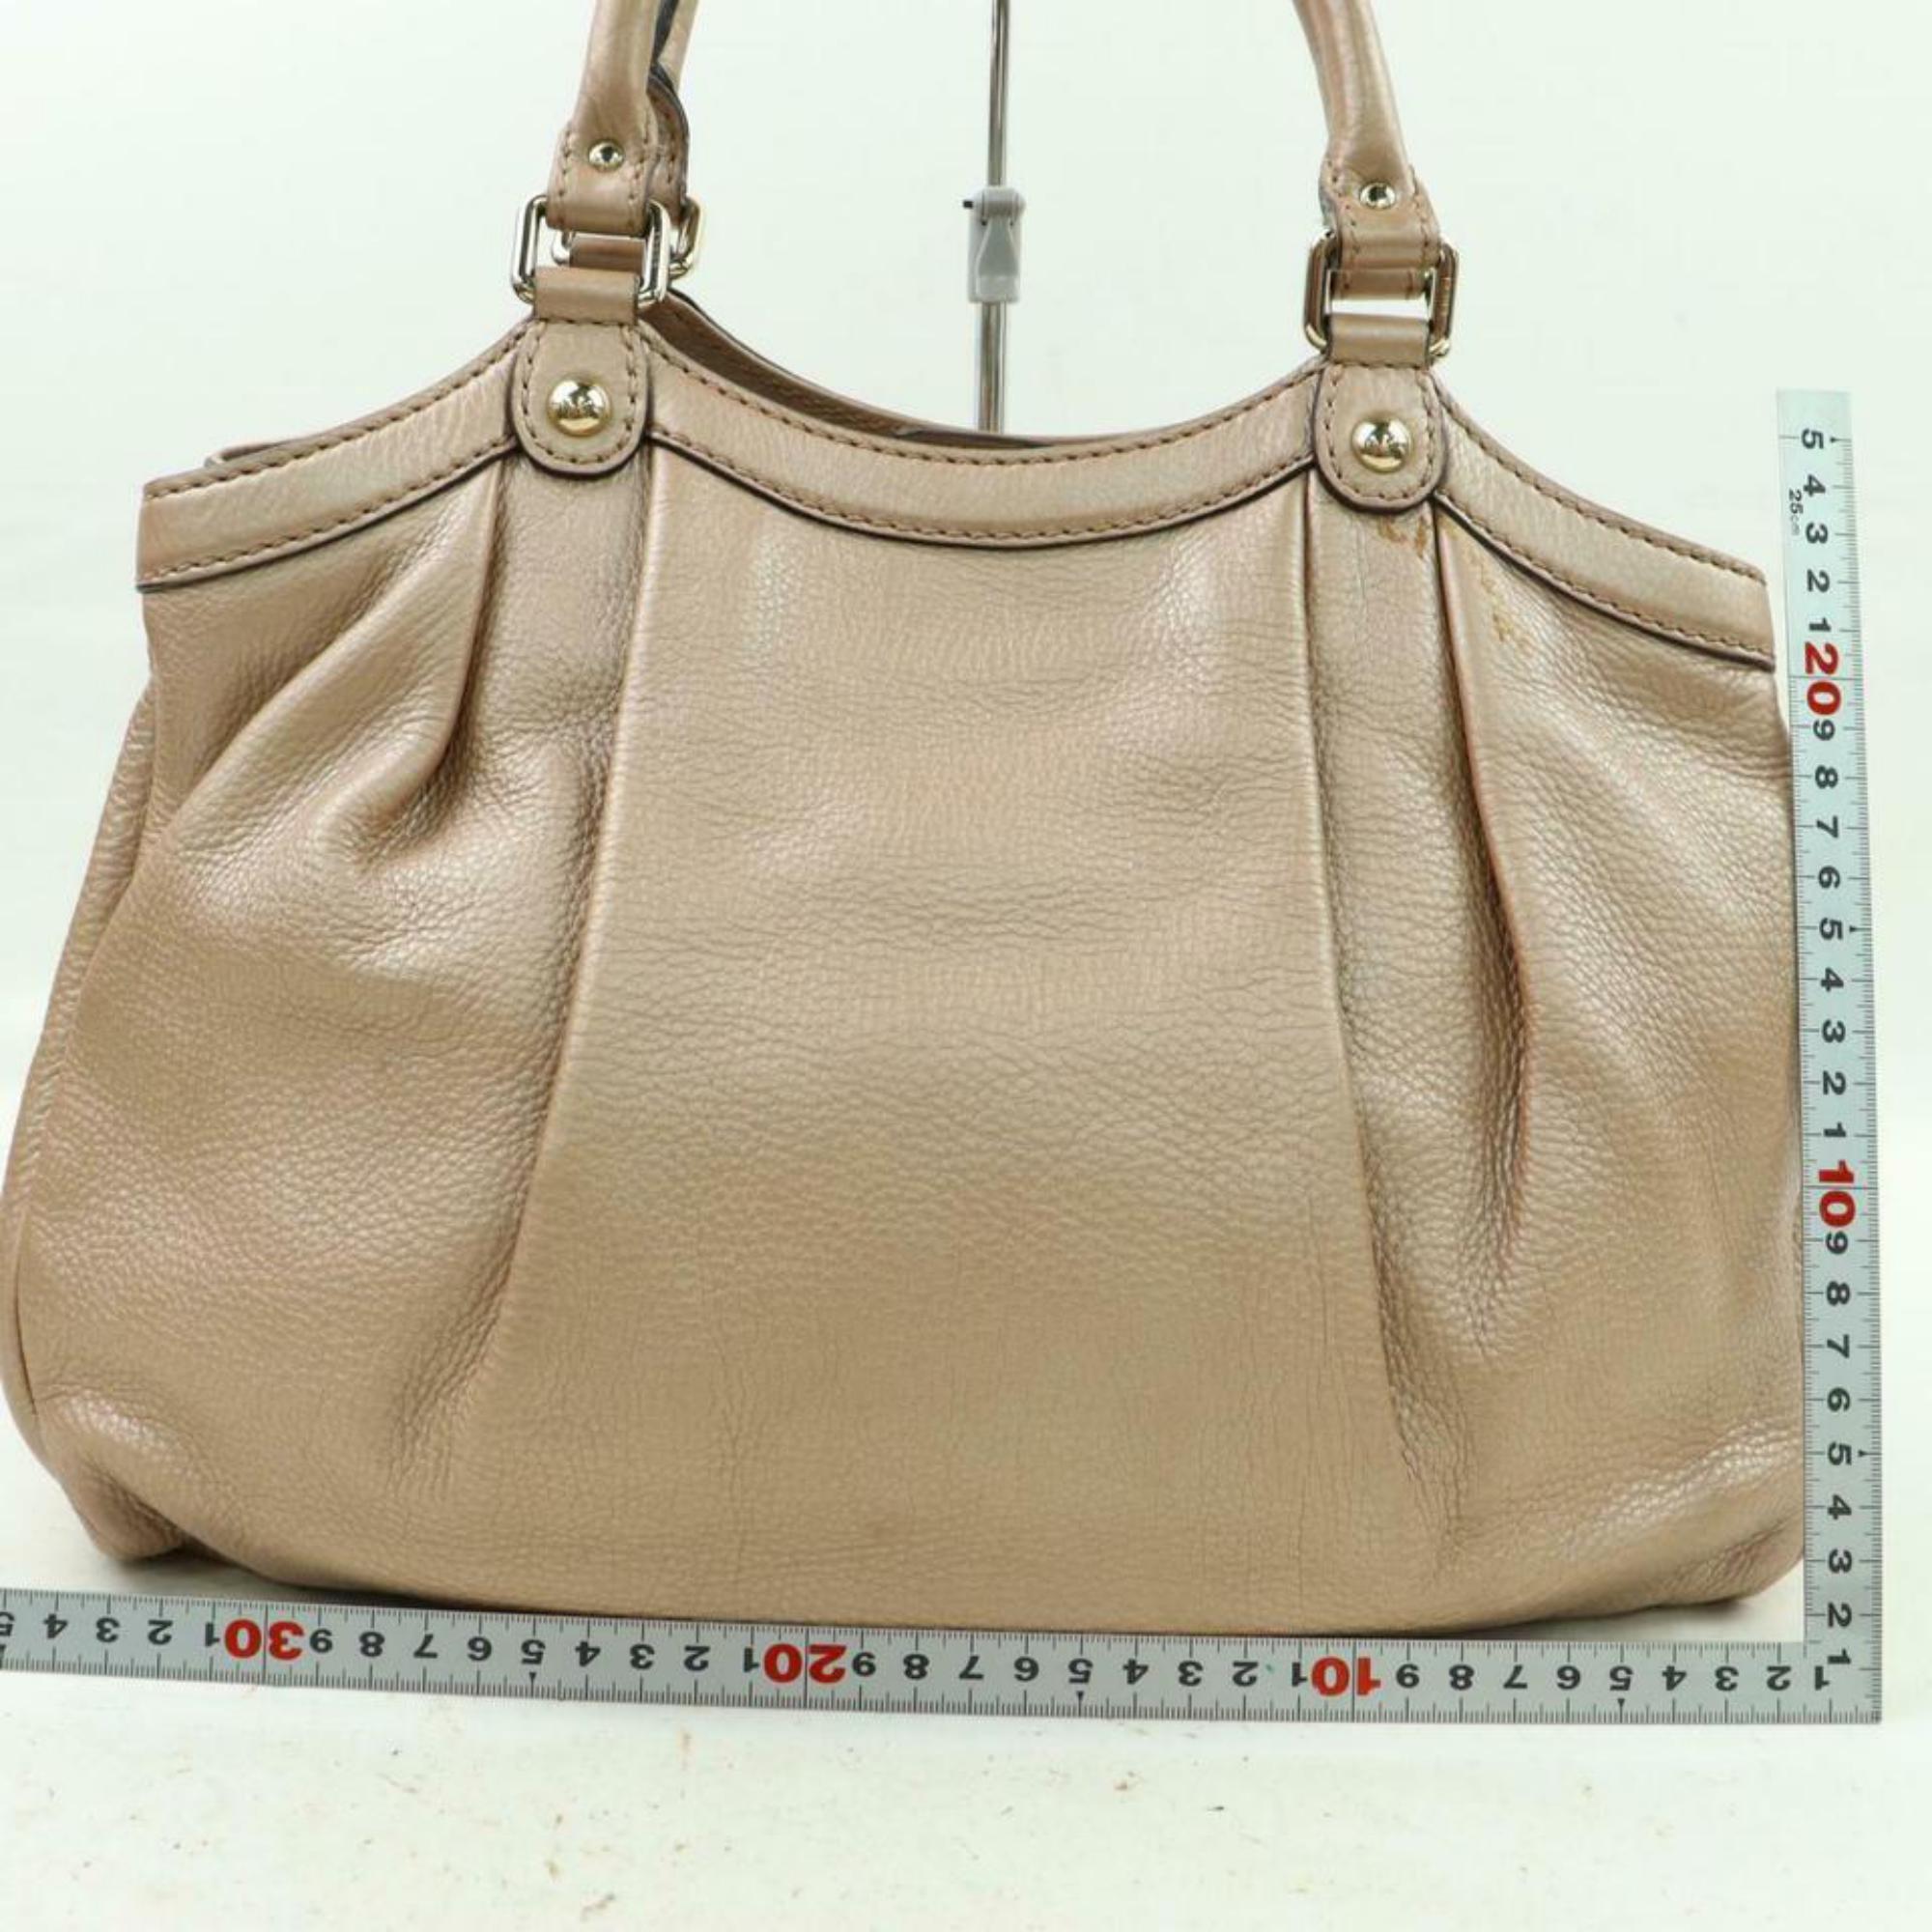 Gucci Sukey Hobo 870327 Beige Leather Satchel For Sale 2